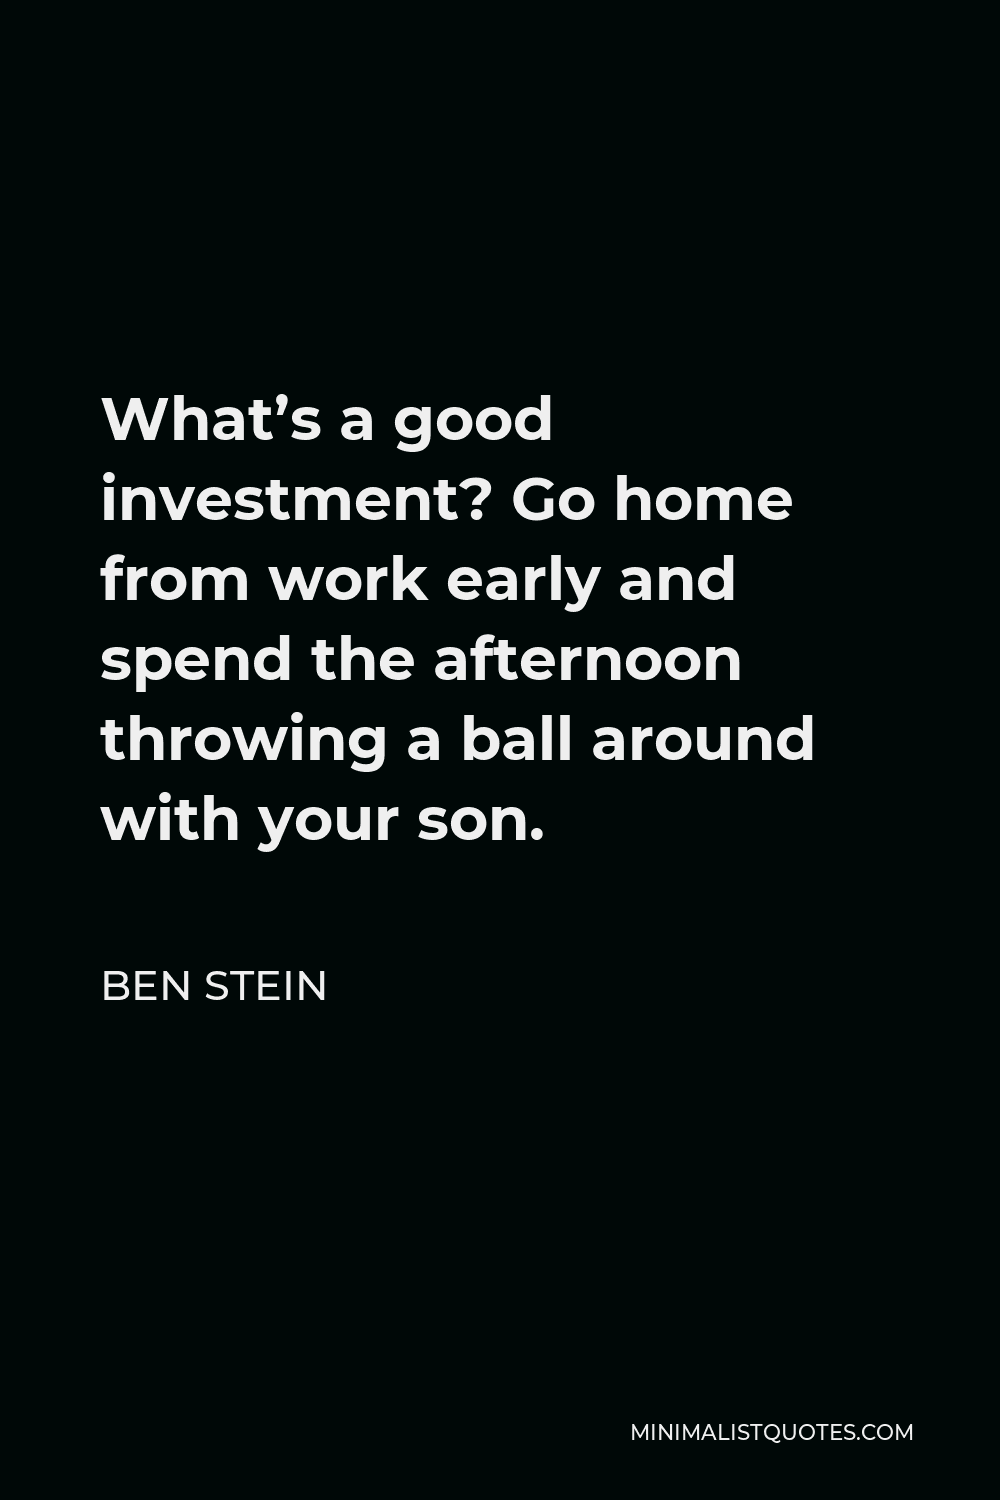 Ben Stein Quote - What’s a good investment? Go home from work early and spend the afternoon throwing a ball around with your son.